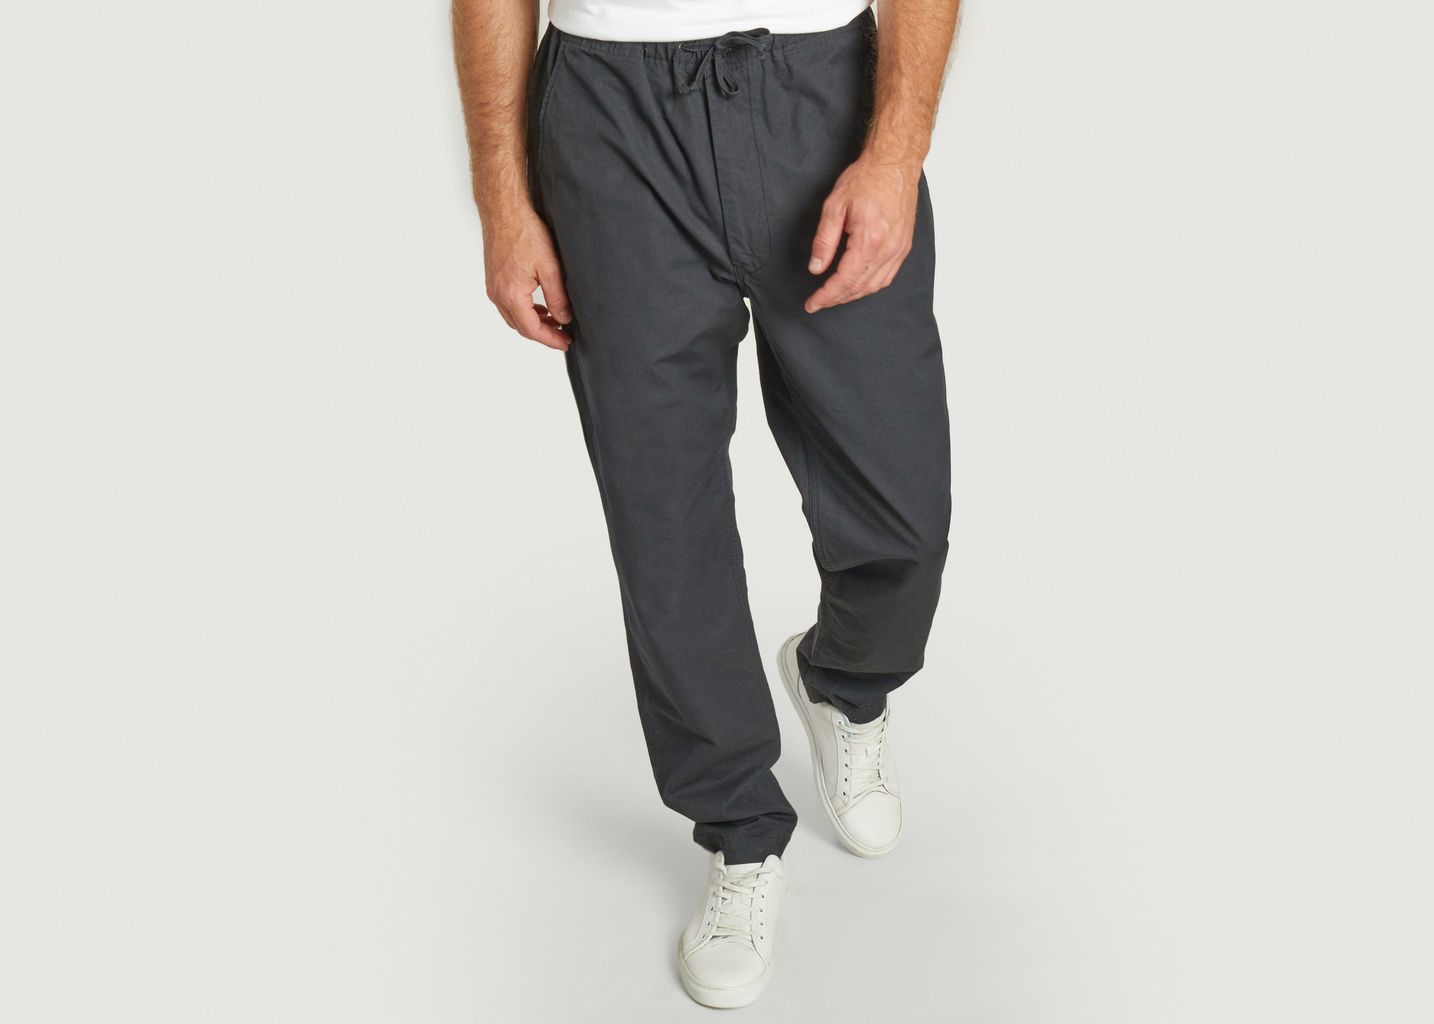 New Yorker trousers - orSlow